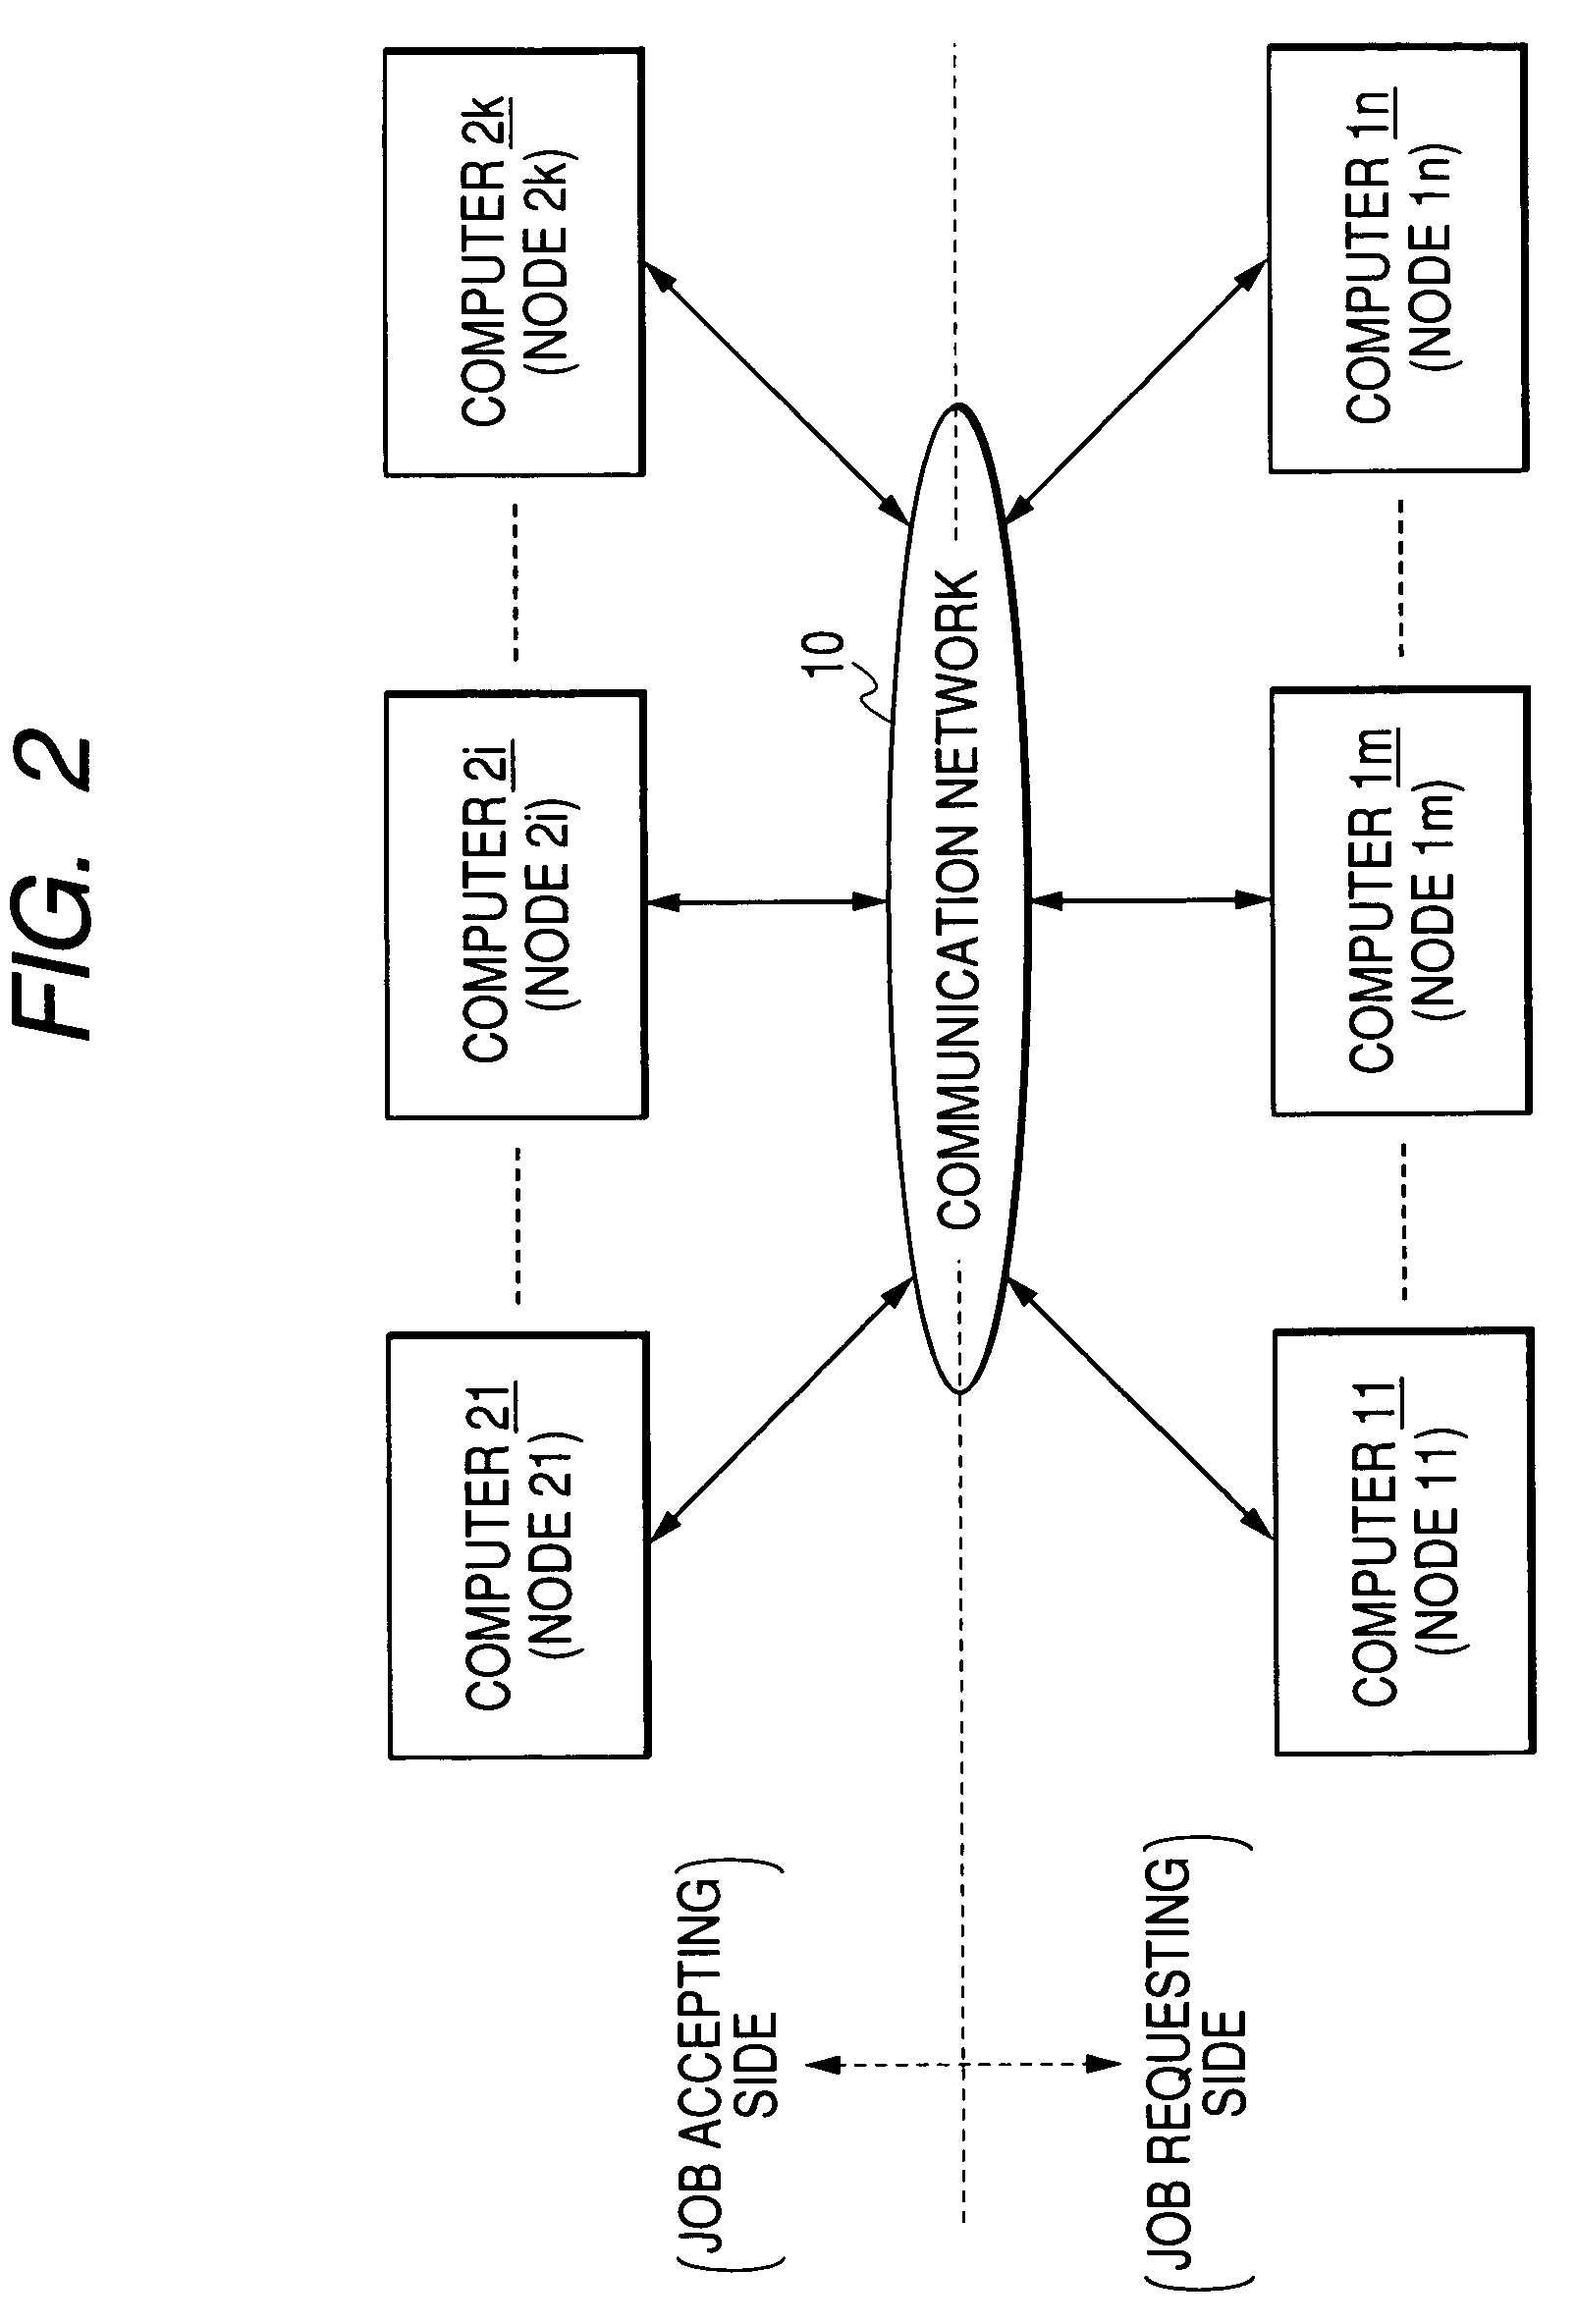 Image processing system for volume rendering